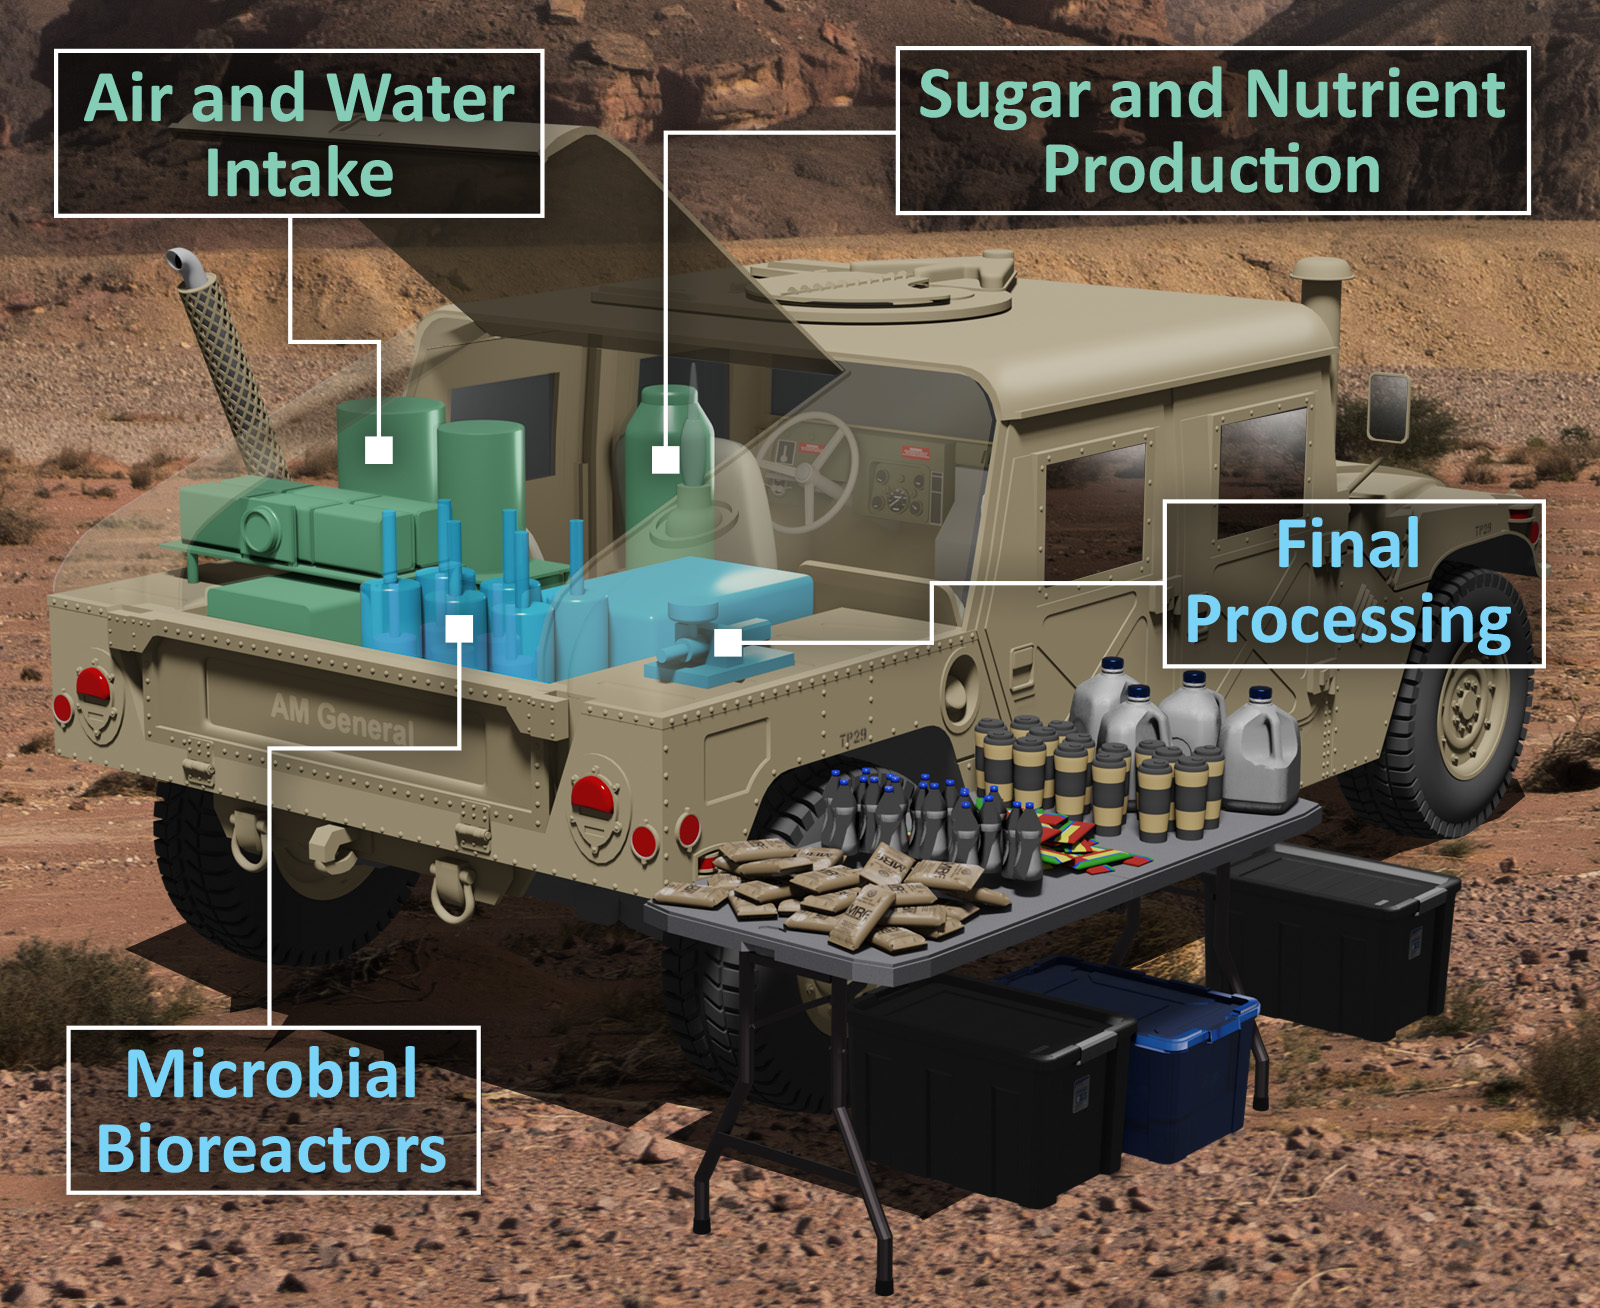 Illustration of a manufacturing and housing system that fits the payload of a standard Humvee, as conceptualized by Johns Hopkins APL researchers